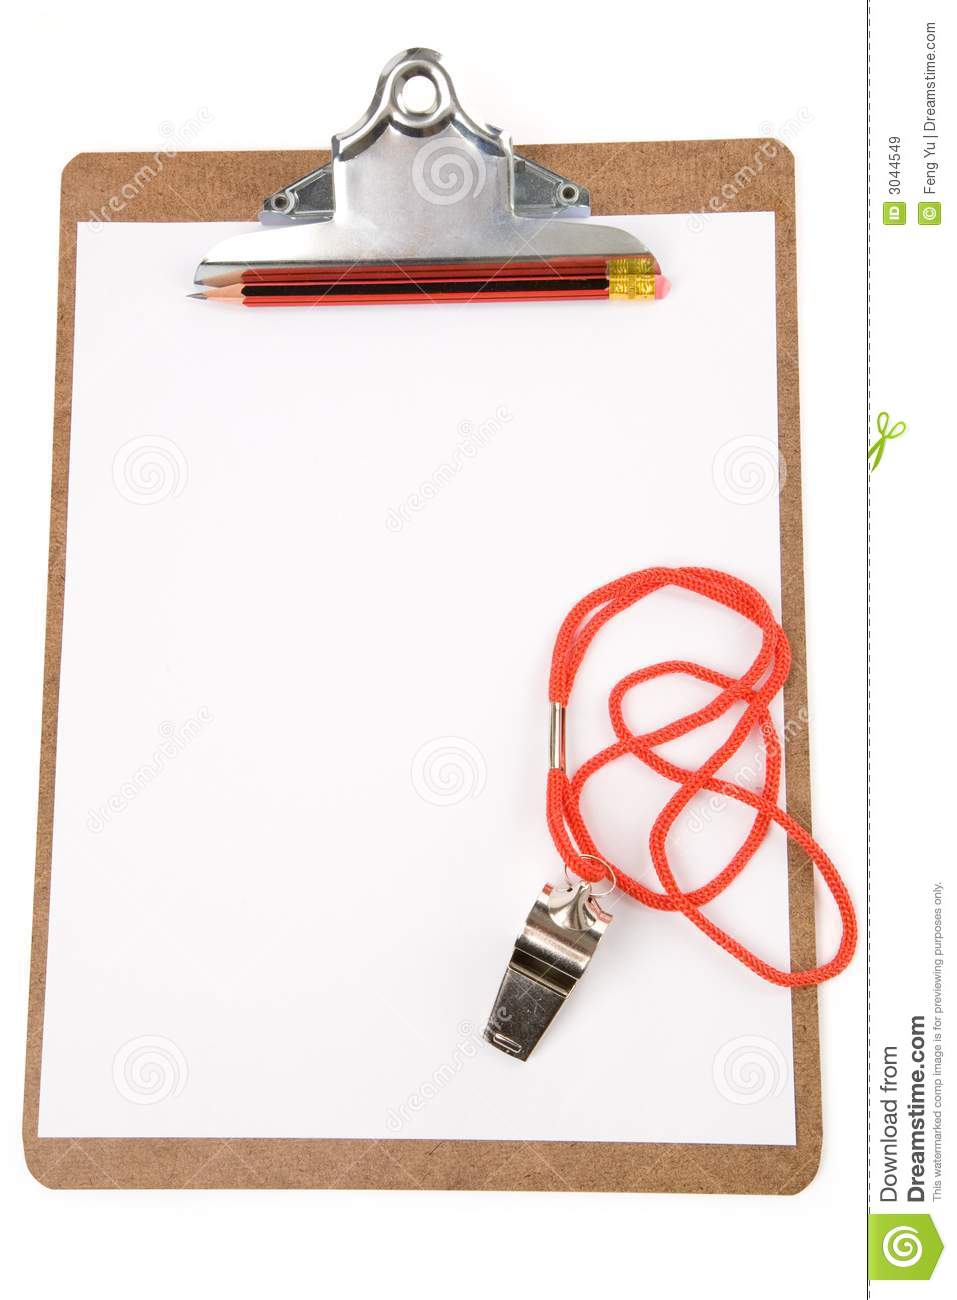 Clipboard And Whistle Royalty Free Stock Images   Image  3044549